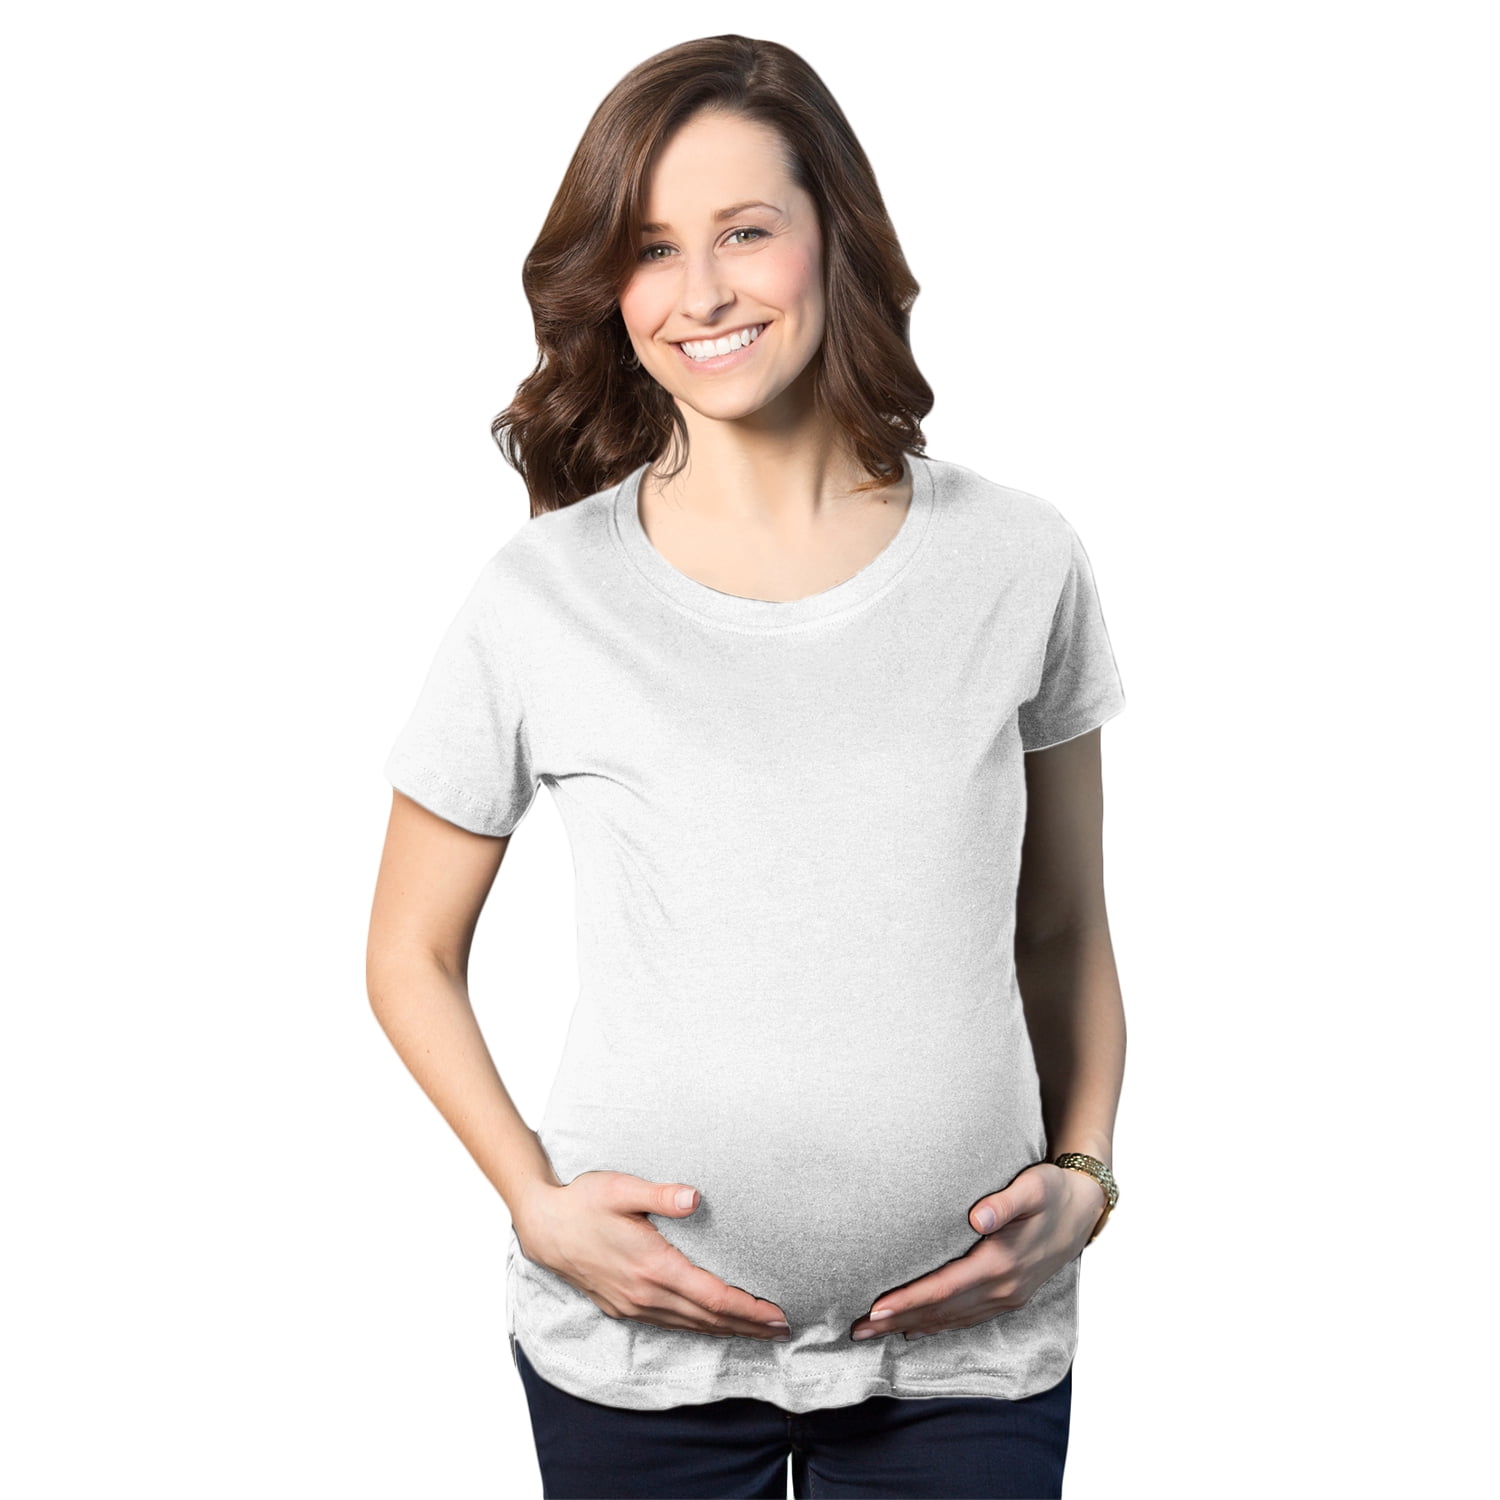 Maternity T Shirts Women Pregnancy Announcement Shirts Funny Sayings New Mom Shirt Summer Short Sleeve Soft Tee Top